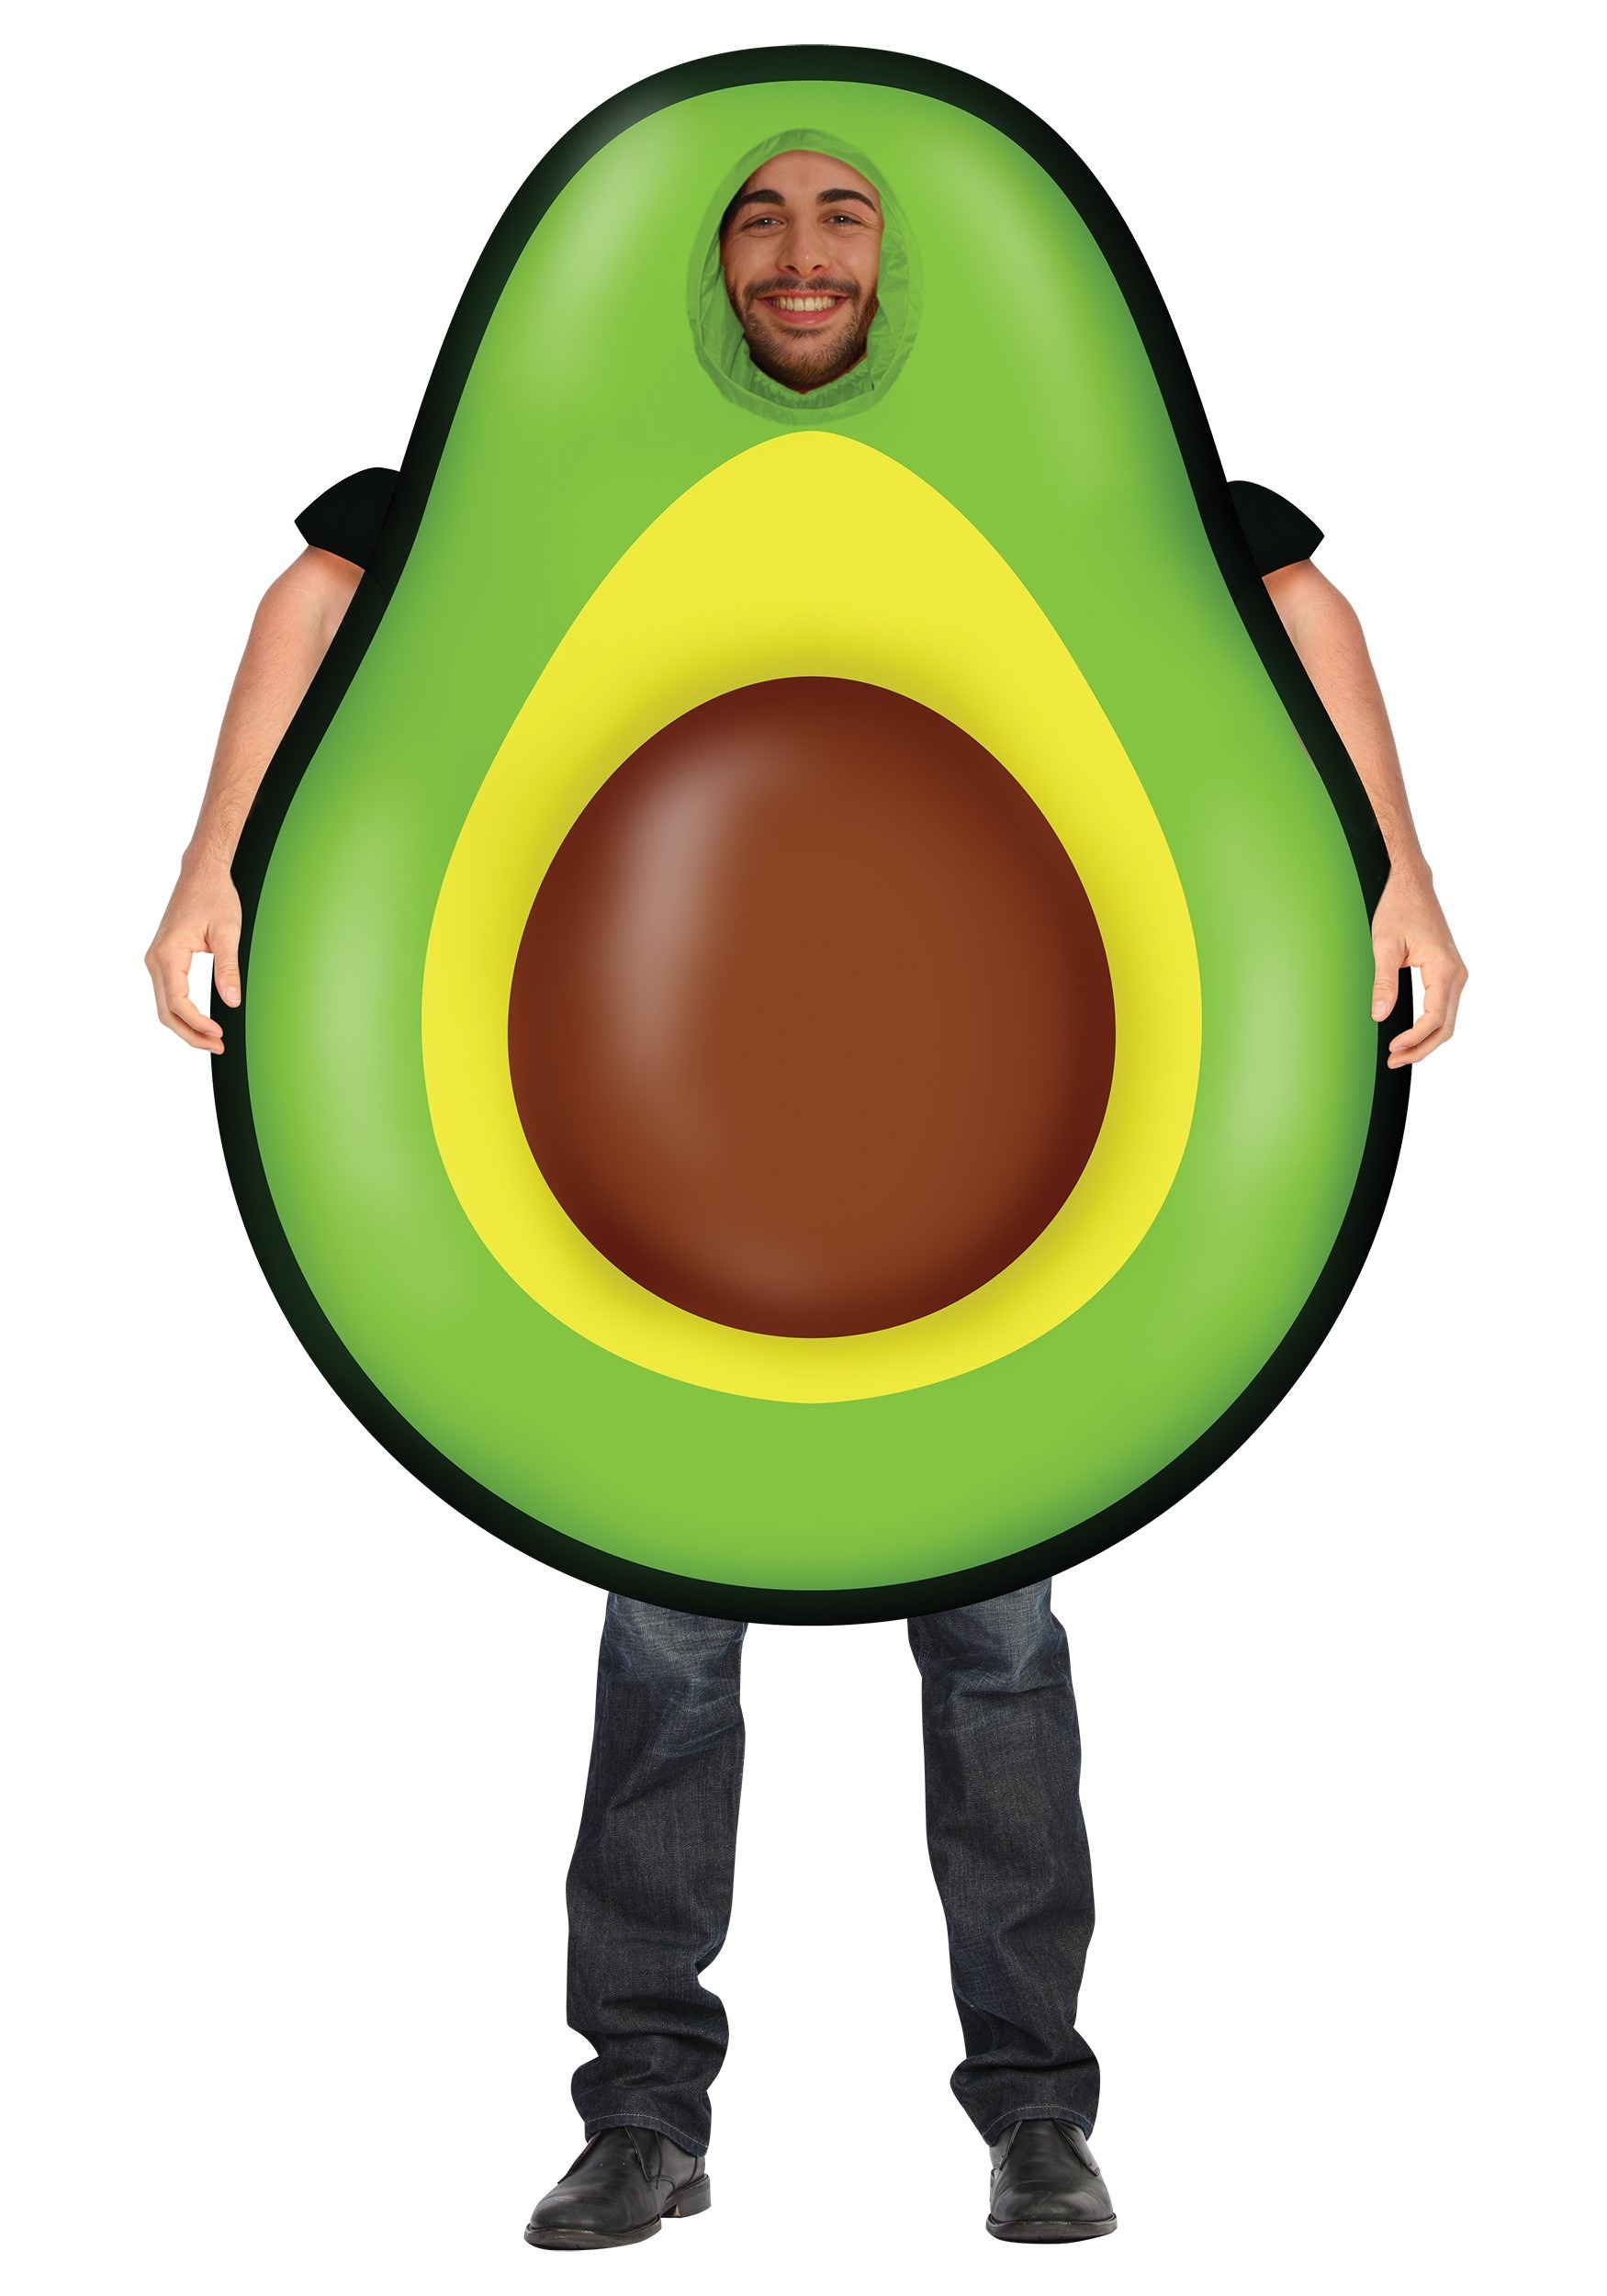 The Adult Inflatable Avocado Costume